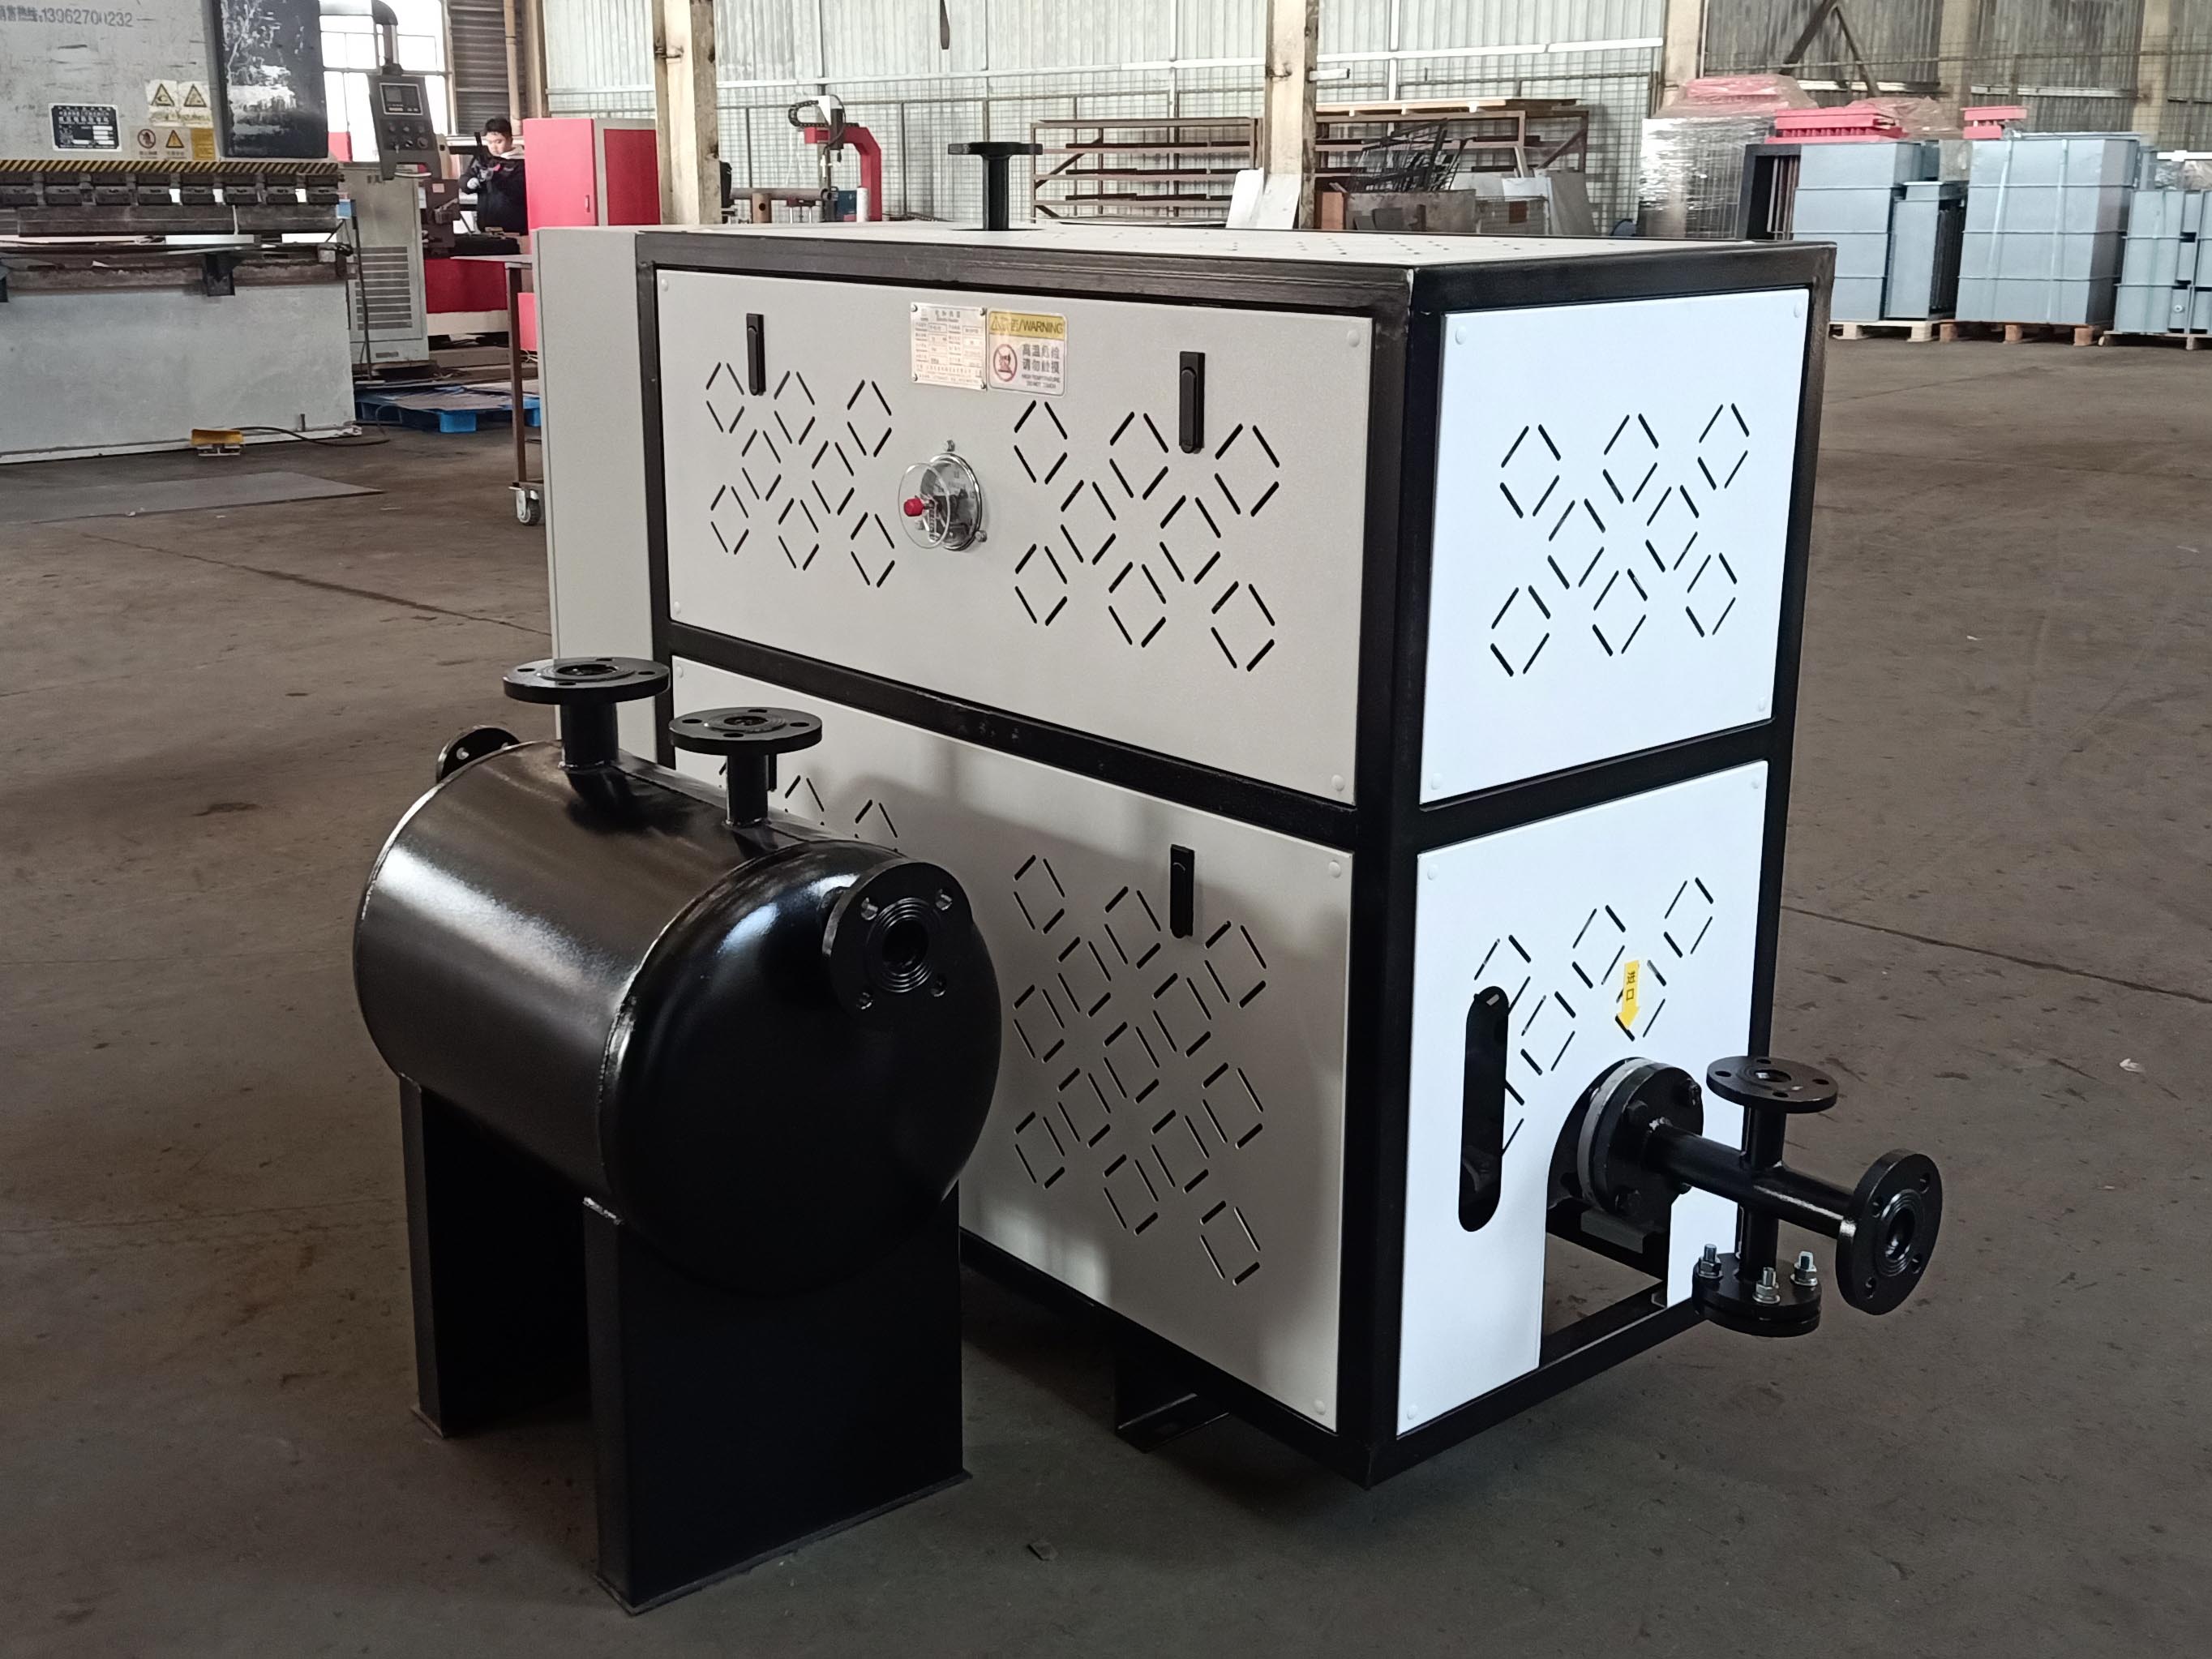 What precautions should be taken when using an electric thermal oil heater?